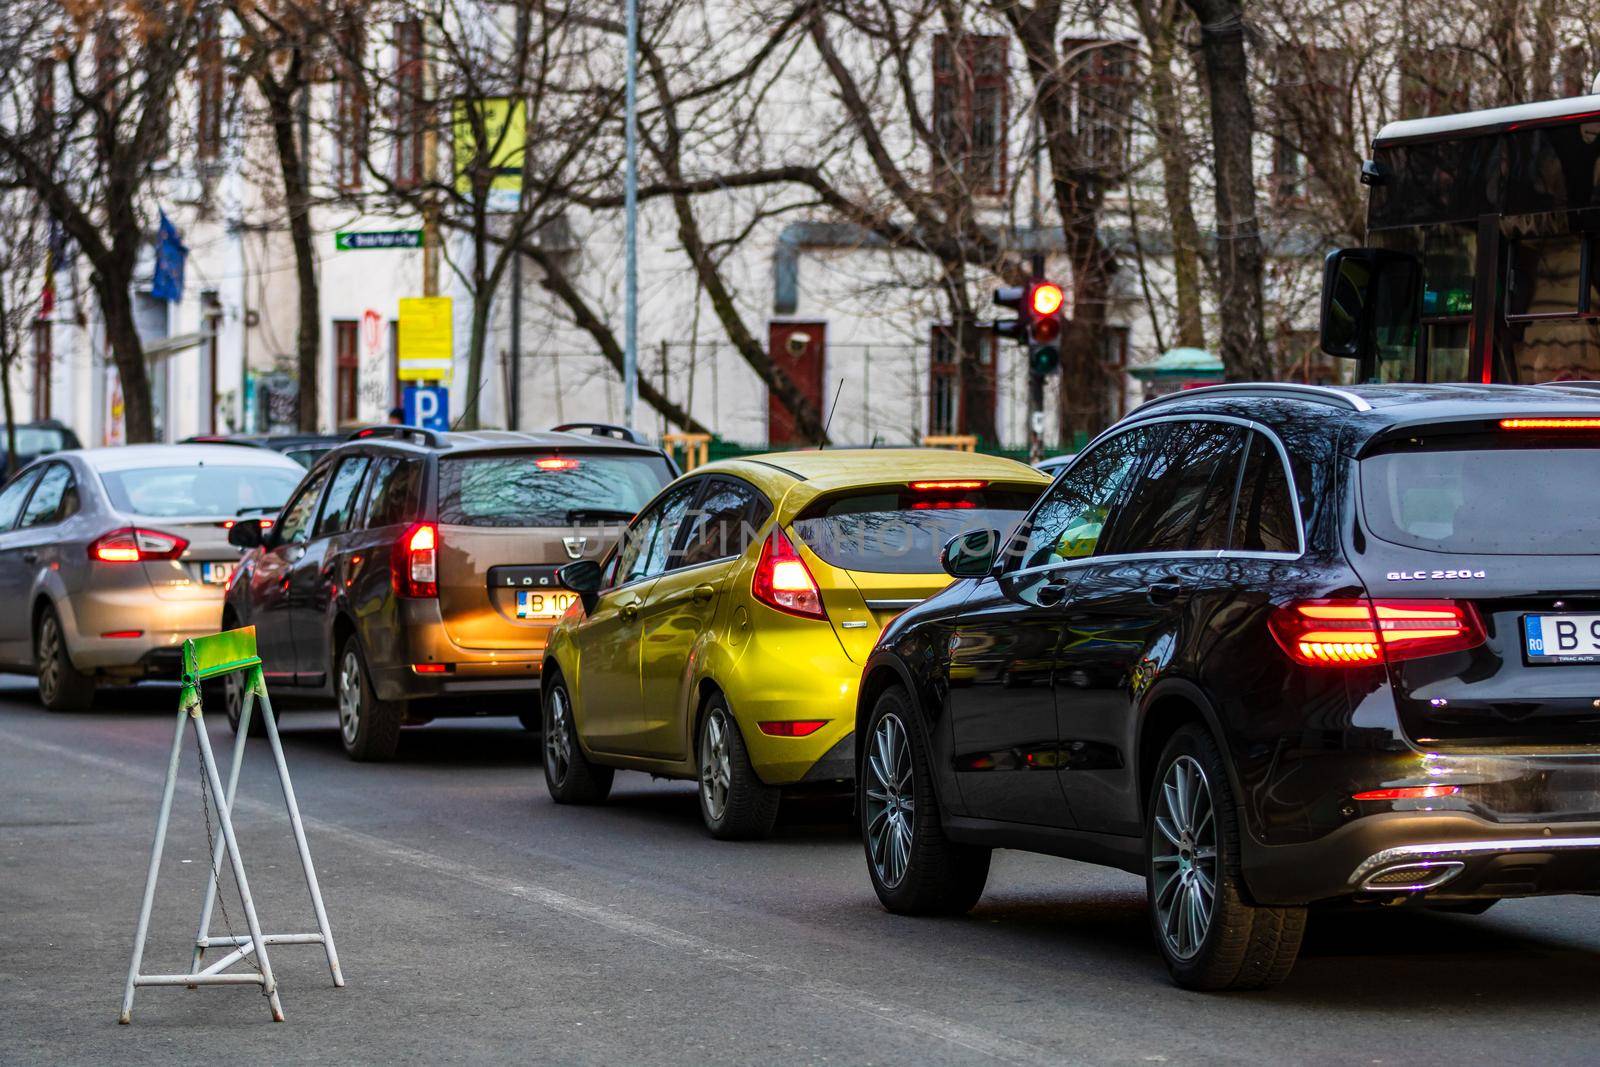 Car traffic at rush hour in downtown area of the city. Car pollution, traffic jam in the morning and evening in the capital city of Bucharest, Romania, 2021